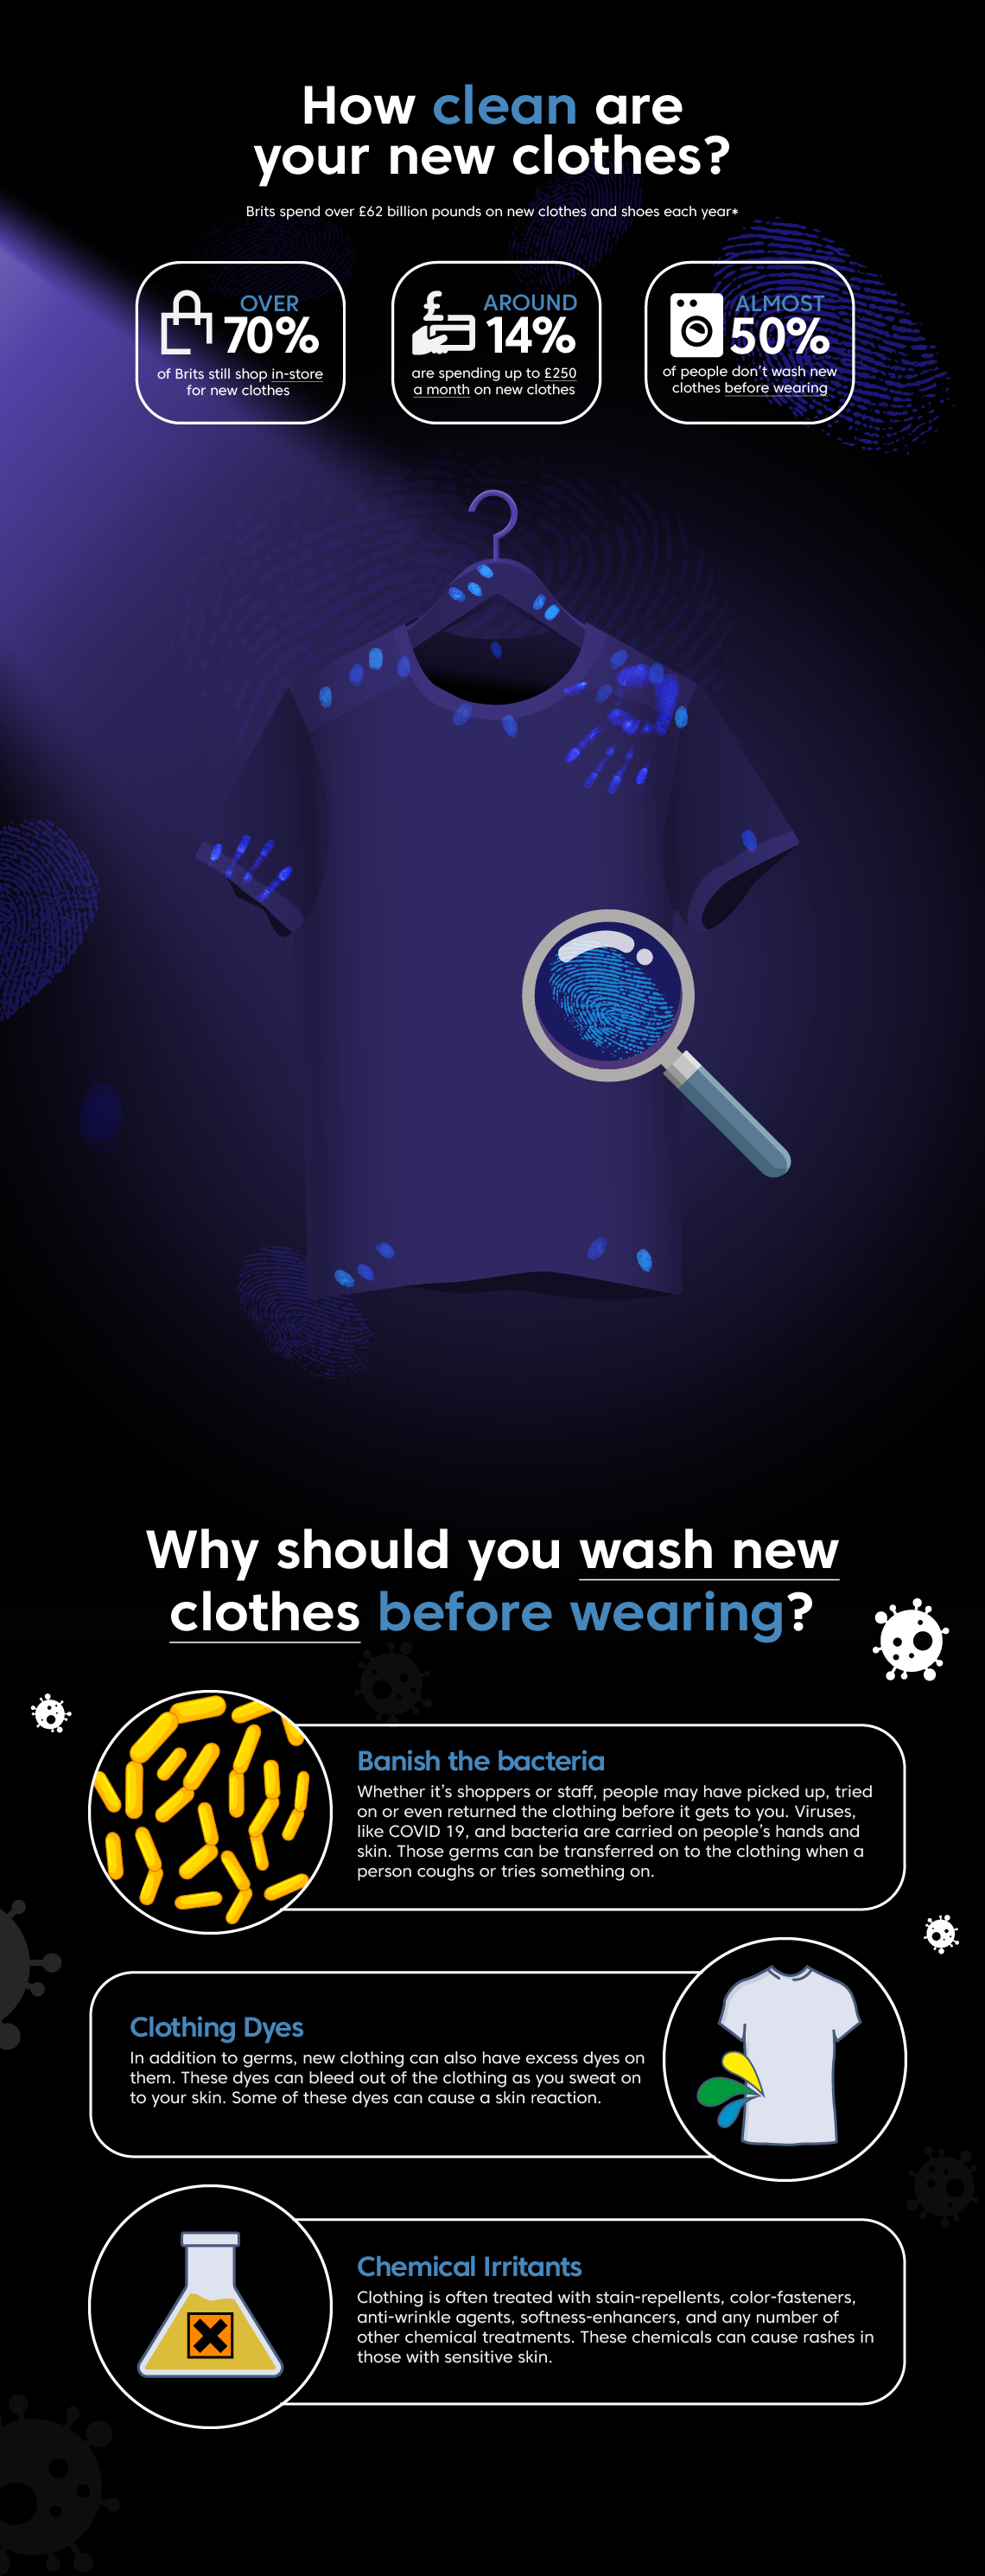 https://storage.beko.co.uk/assets/beko/lifestyle/tips-at-home/why-you-should-wash-before-you-wear/germs-on-clothes-infographic.png